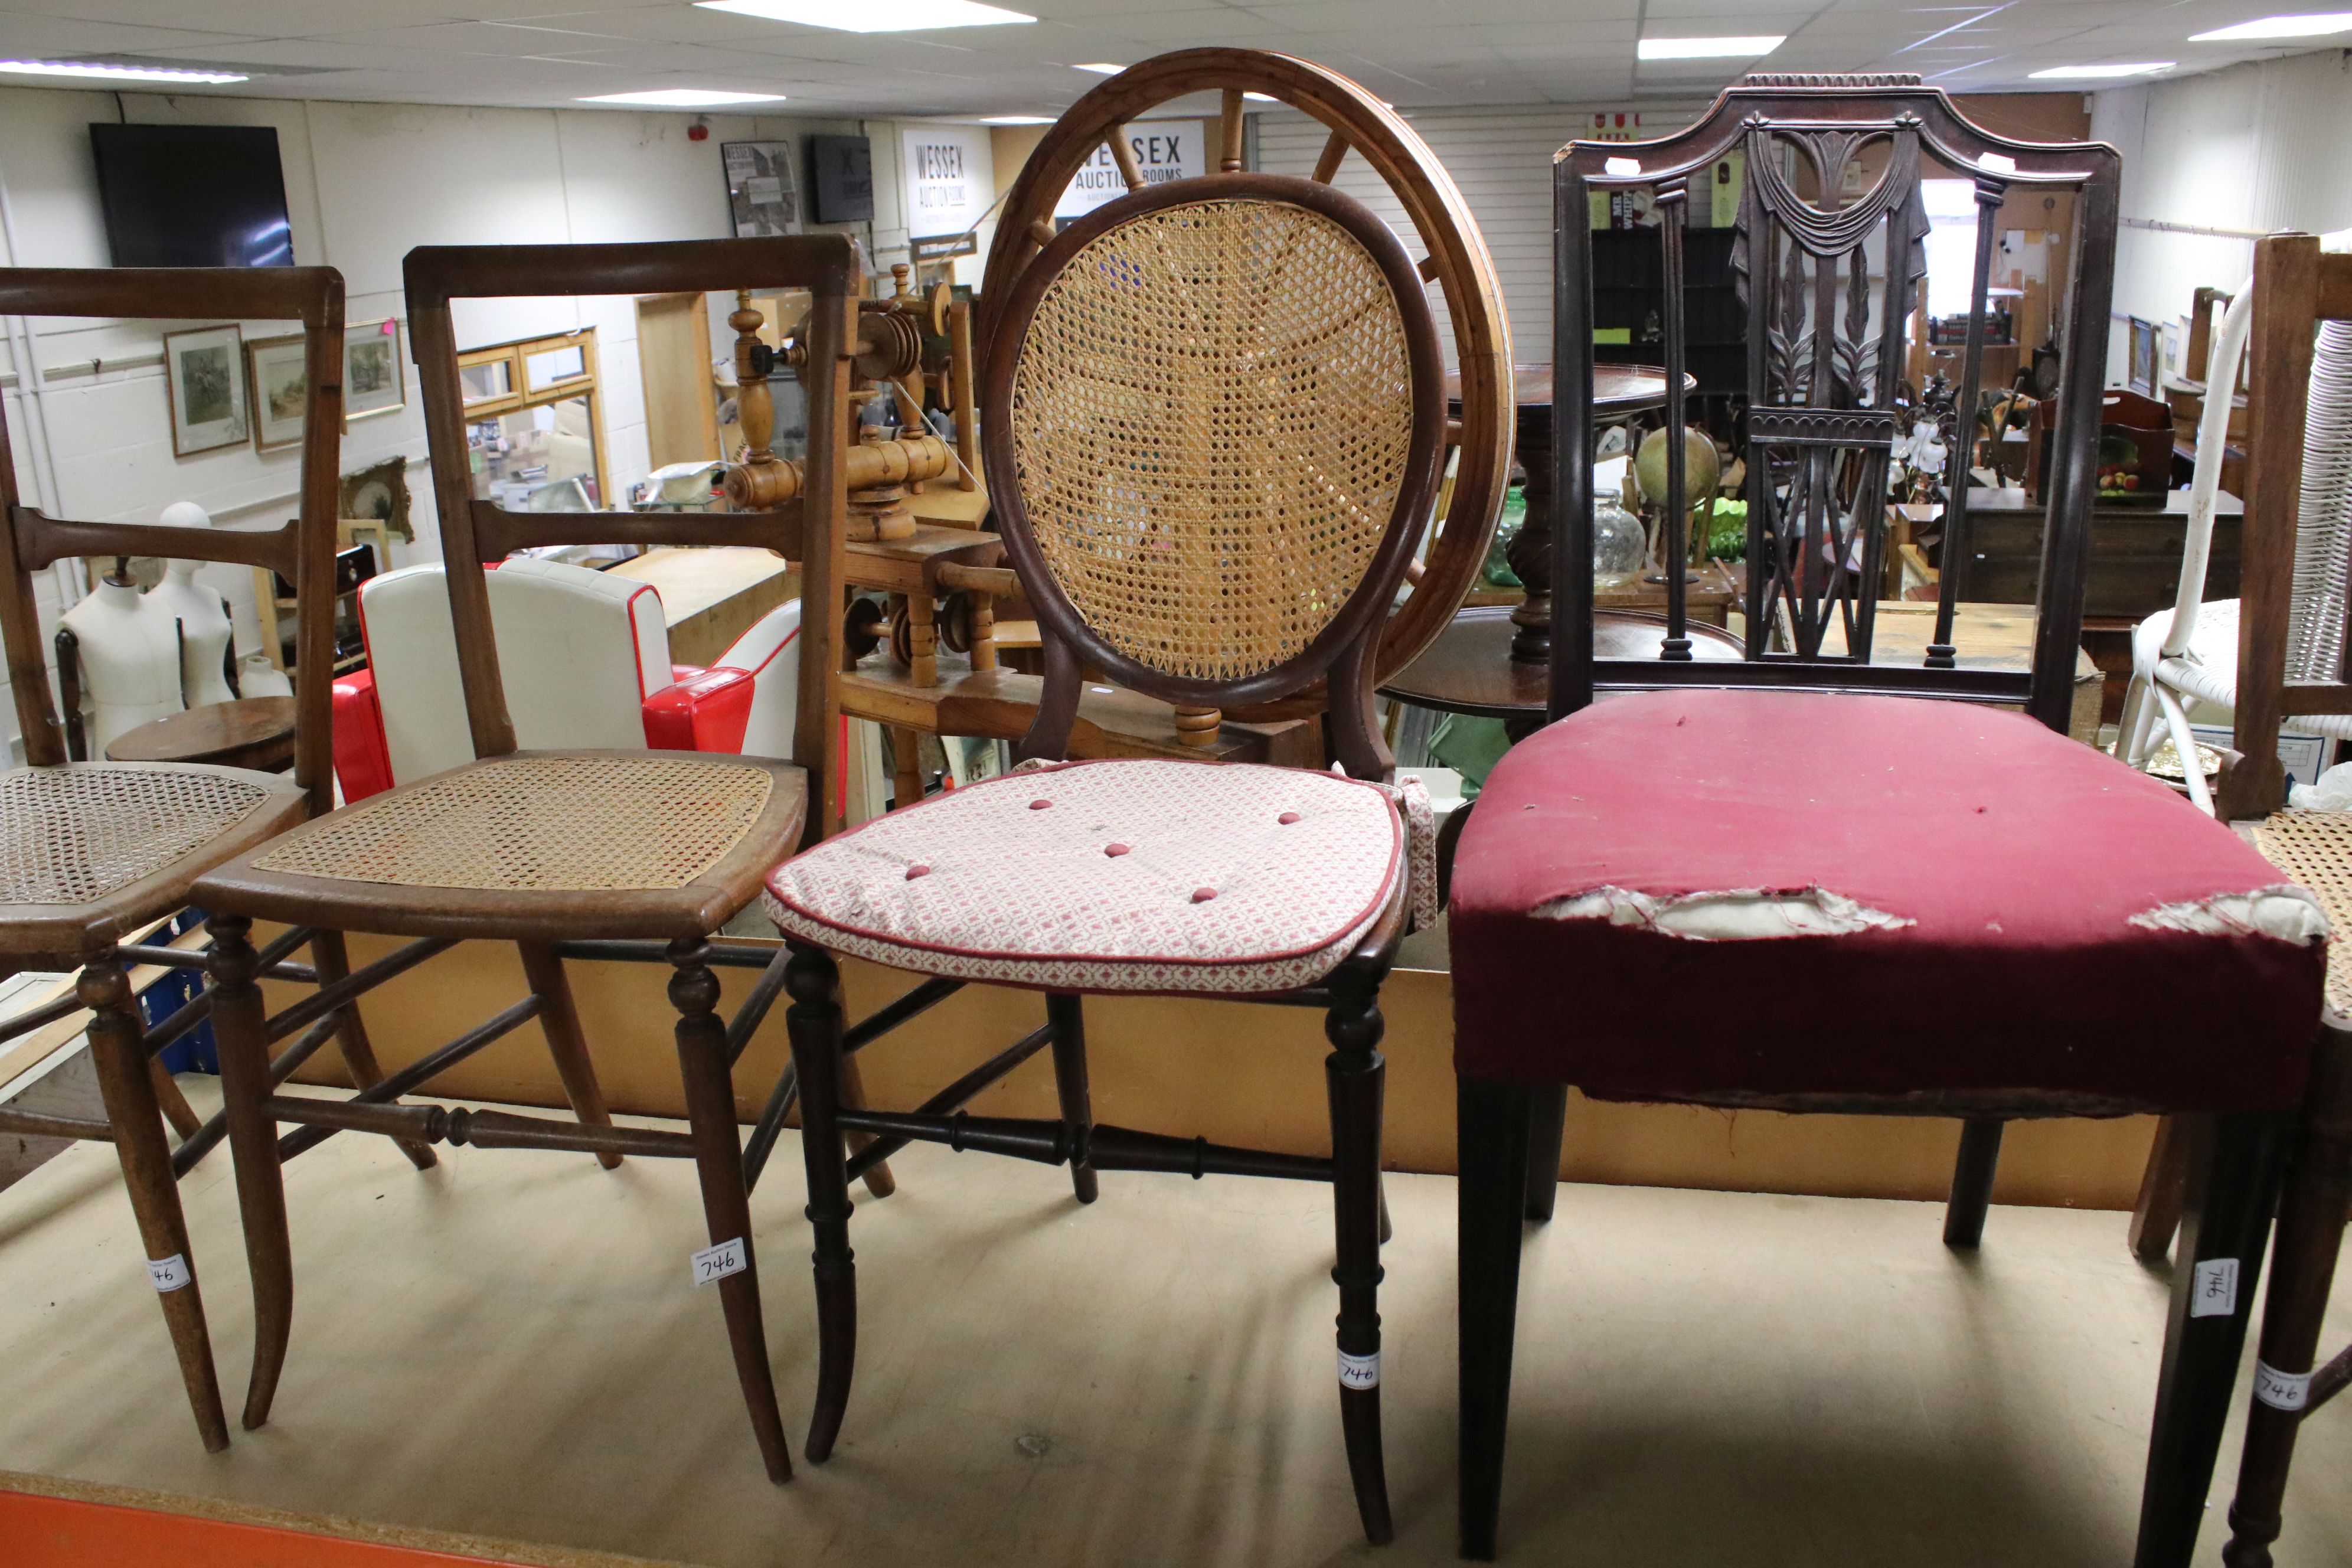 Collection of Five Chairs including Pair of 19th century Bedroom Chairs with Cane Seats - Image 3 of 4